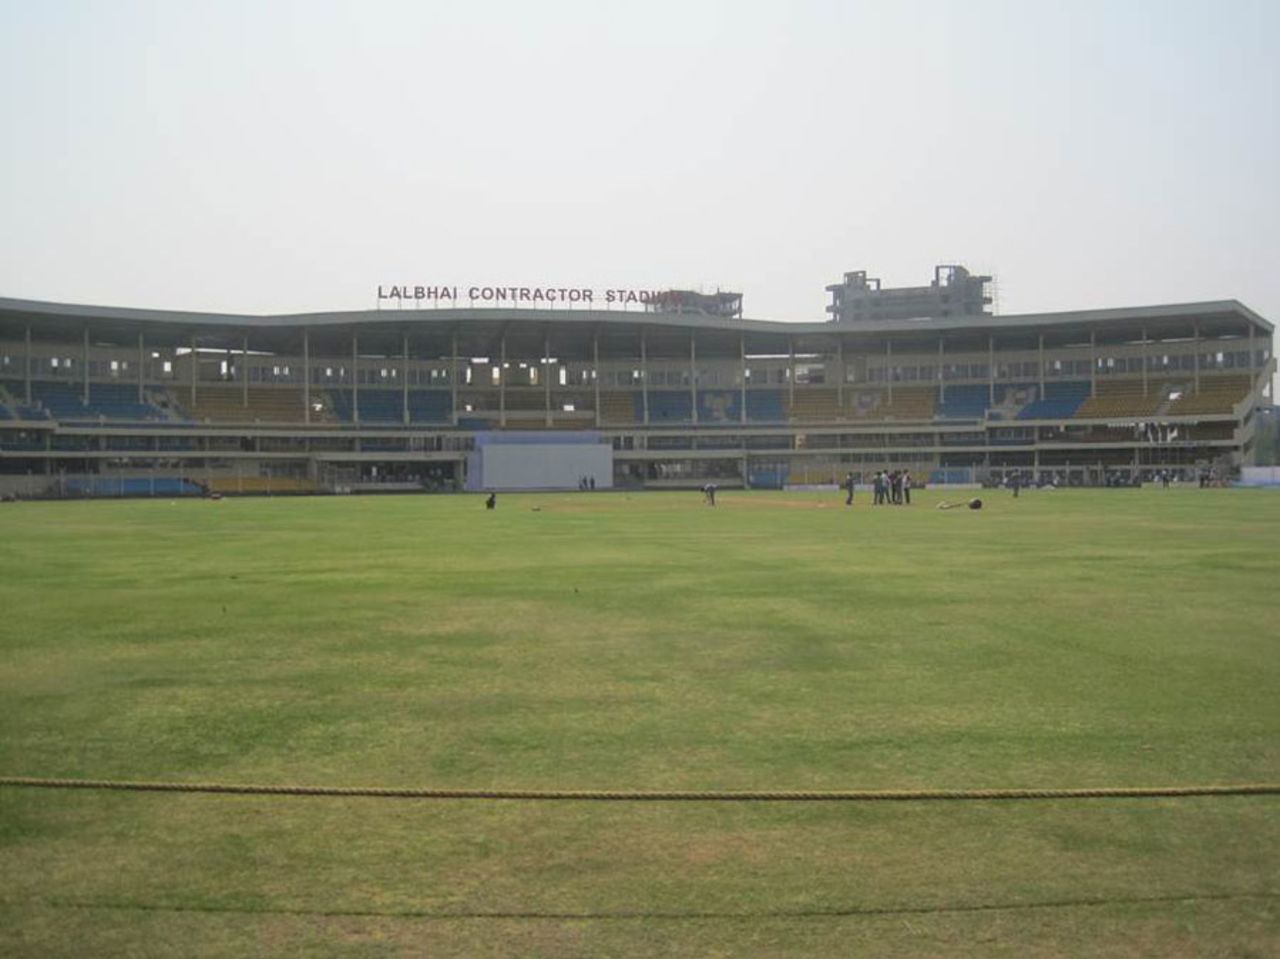 A view of the newly constructed stands at the Lalbhai Contractor stadium, Surat, November 6, 2013